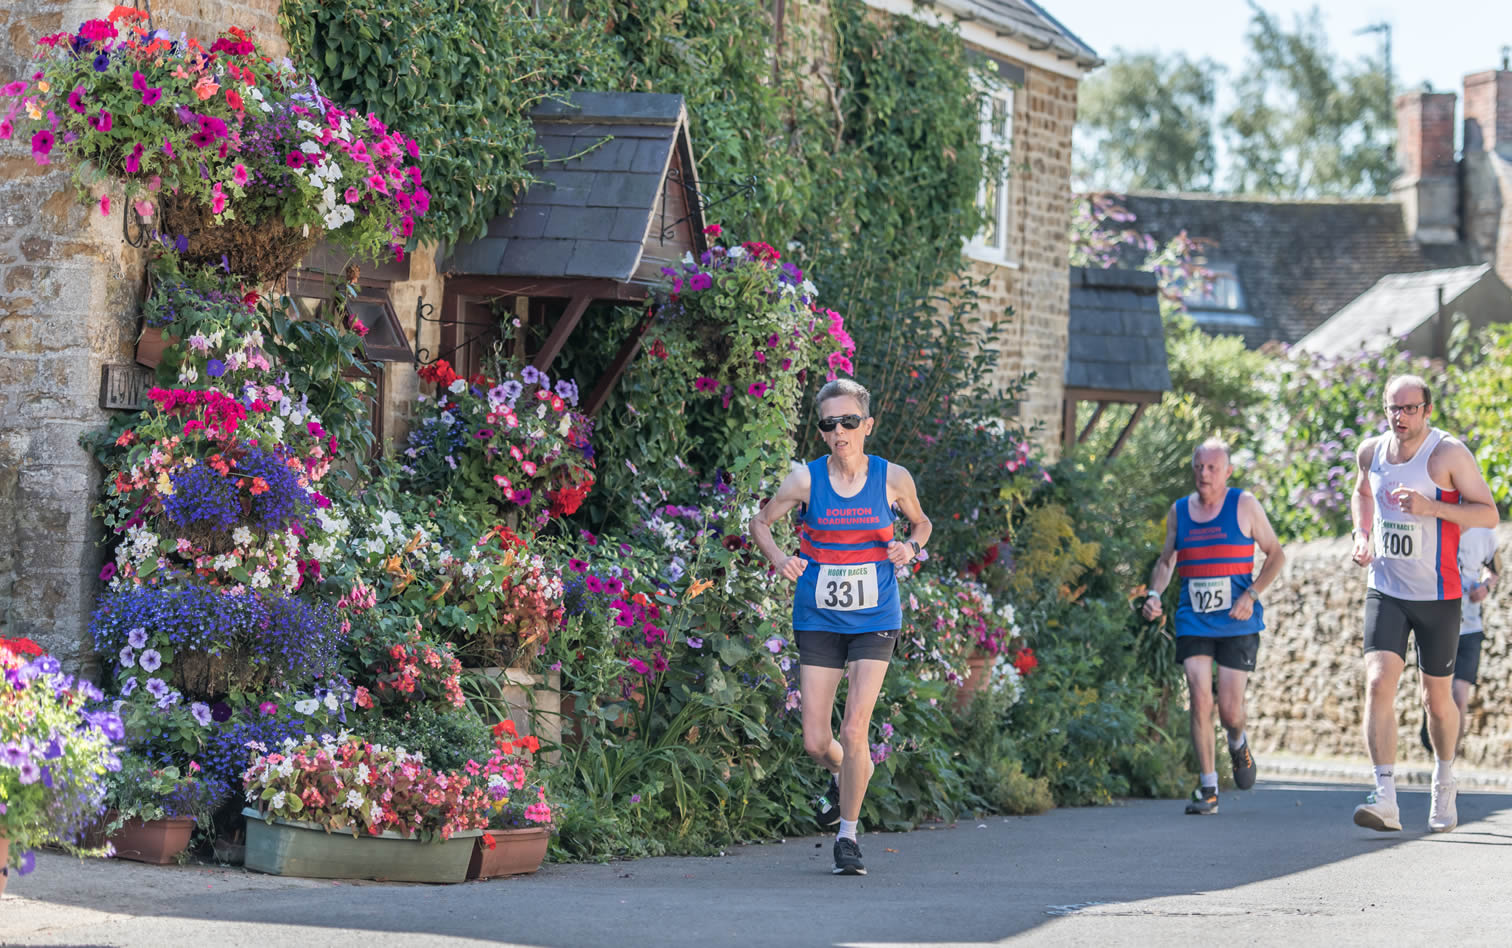 Bourton's Lorna Shawcross at Hooky 6 miles - 7th August 2022